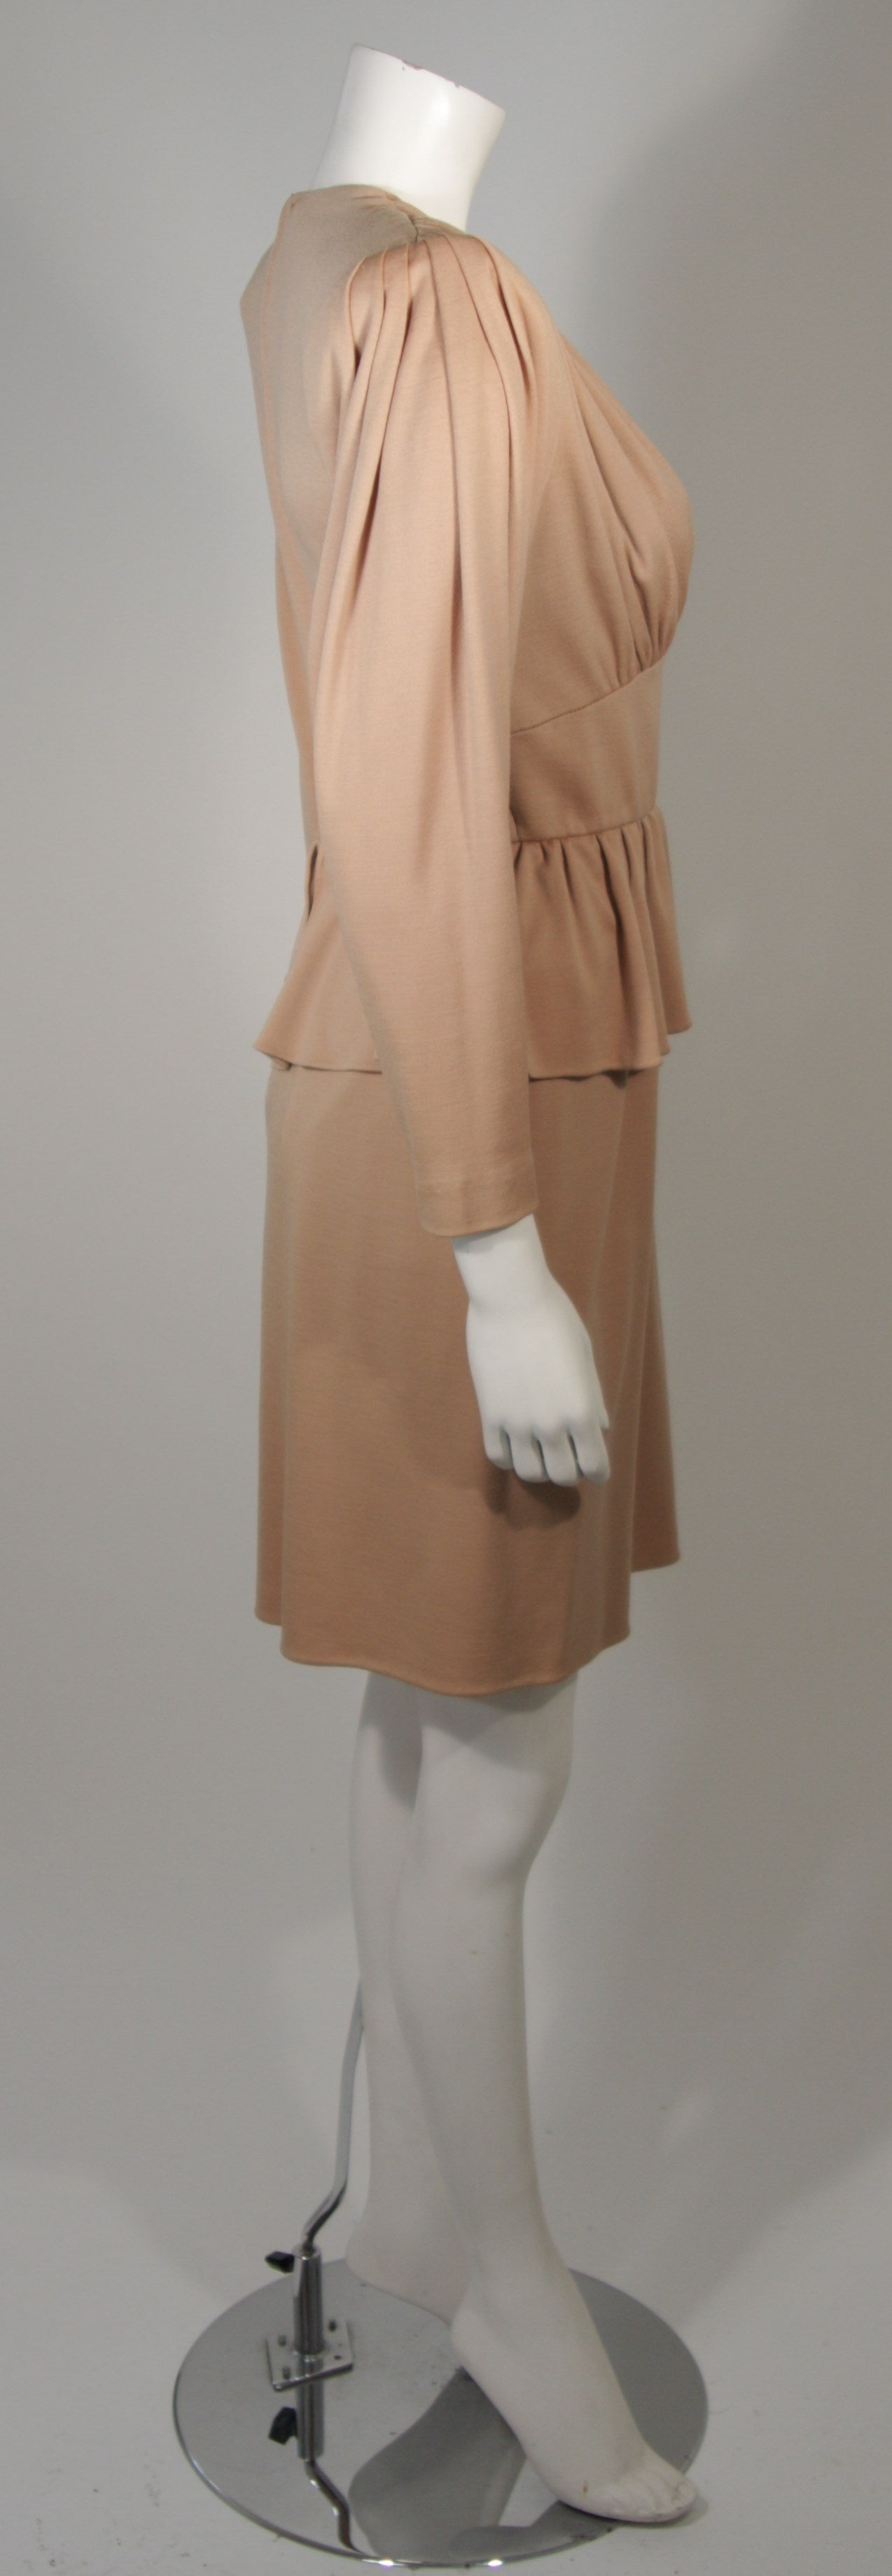 Women's Nolan Miller Attributed Camel Wool Cape and Cocktail Dress Size Small